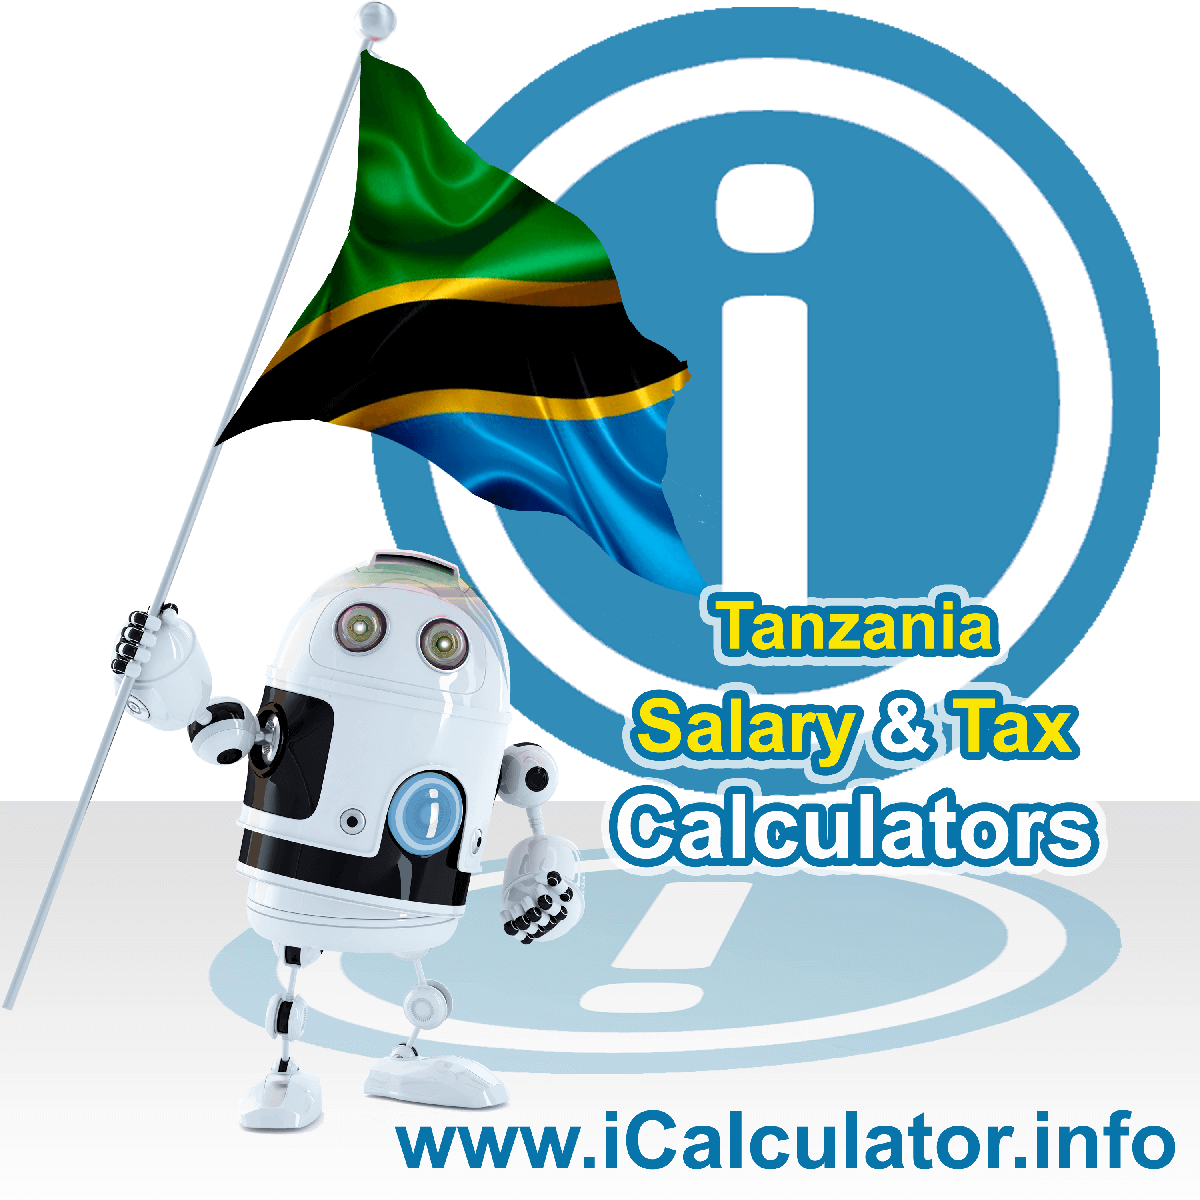 Tanzania Salary Calculator. This image shows the Tanzaniaese flag and information relating to the tax formula for the Tanzania Tax Calculator